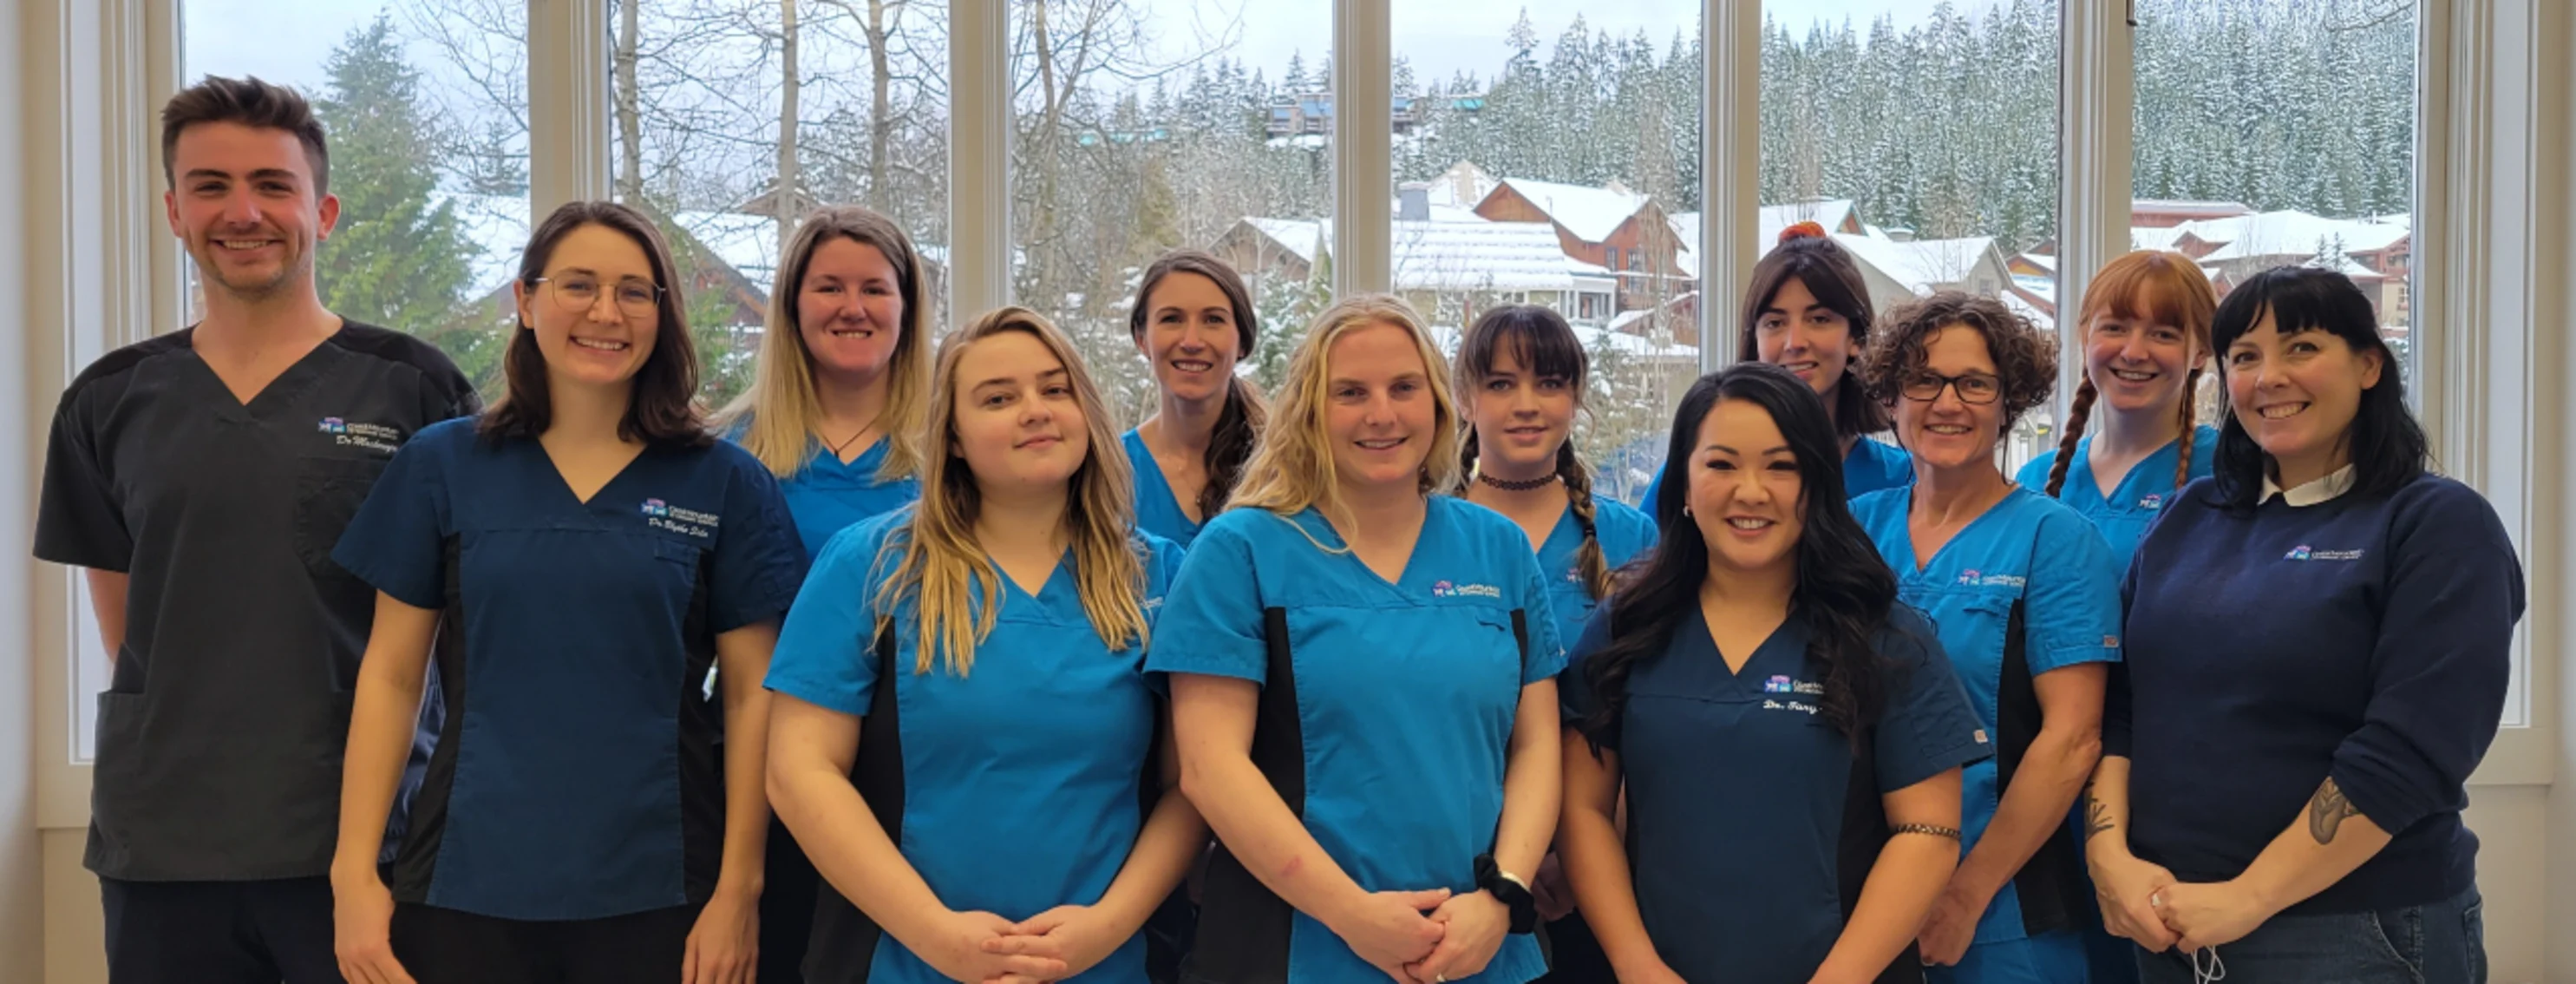 Coast Mountain Veterinary Services - Our Team - Staff - Group Image Nov. 2021